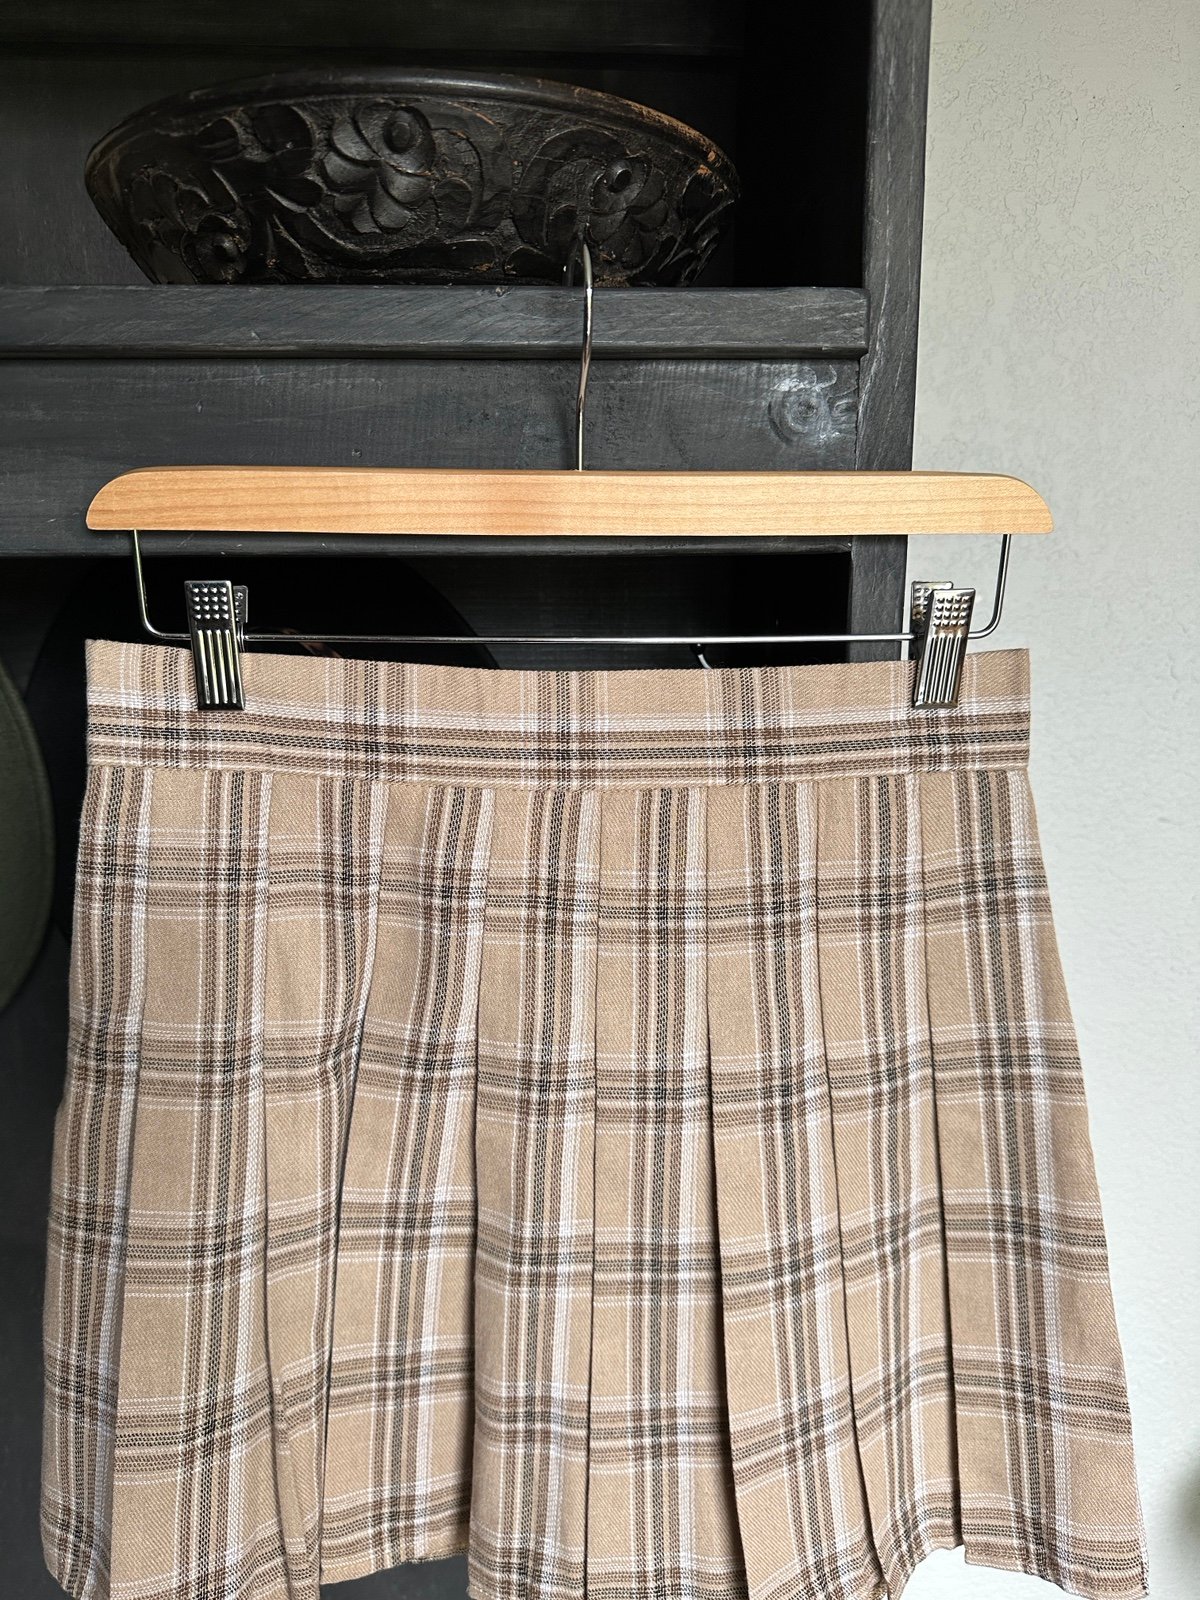 Wholesale price Womens Plaid Pleated Skirt Size Medium mHy70hXCV Everyday Low Prices